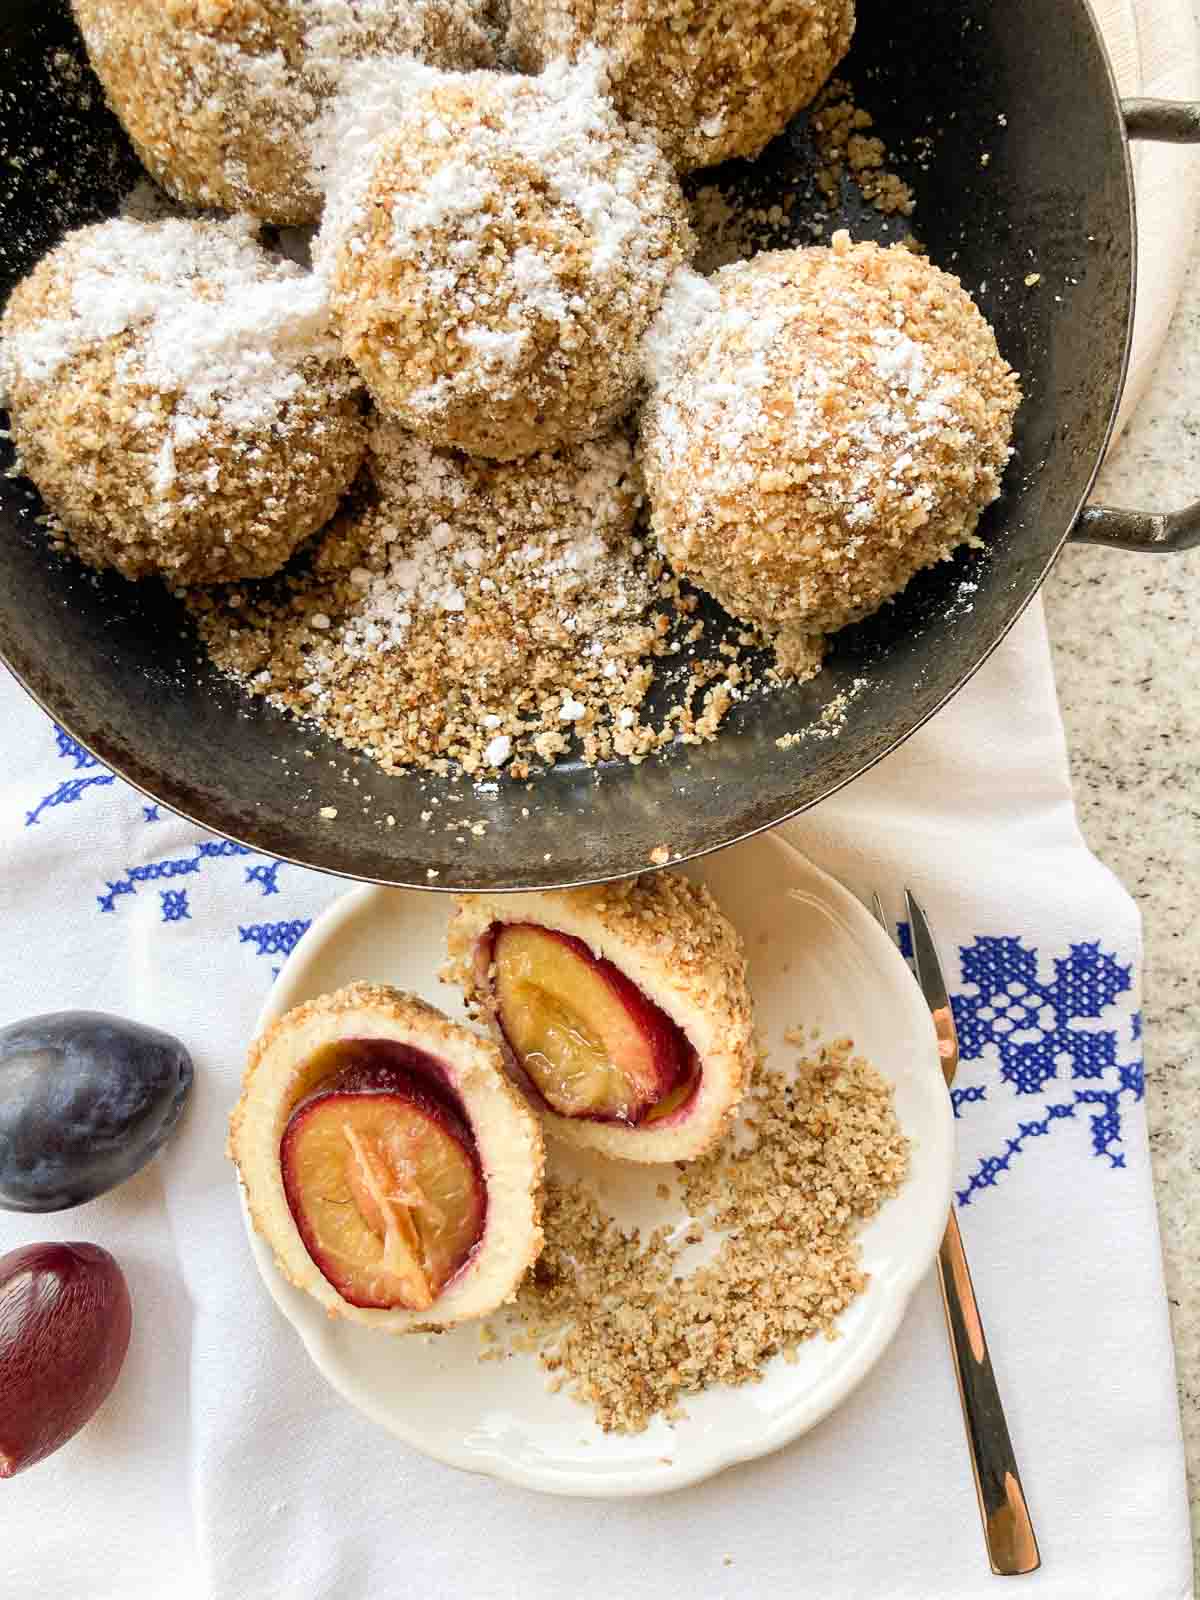 Zwetschkenknödel Brandteig mit Nussbröseln | Traditional Austrian choux pastry dumplings filled with plums and covered in breadcrumbs